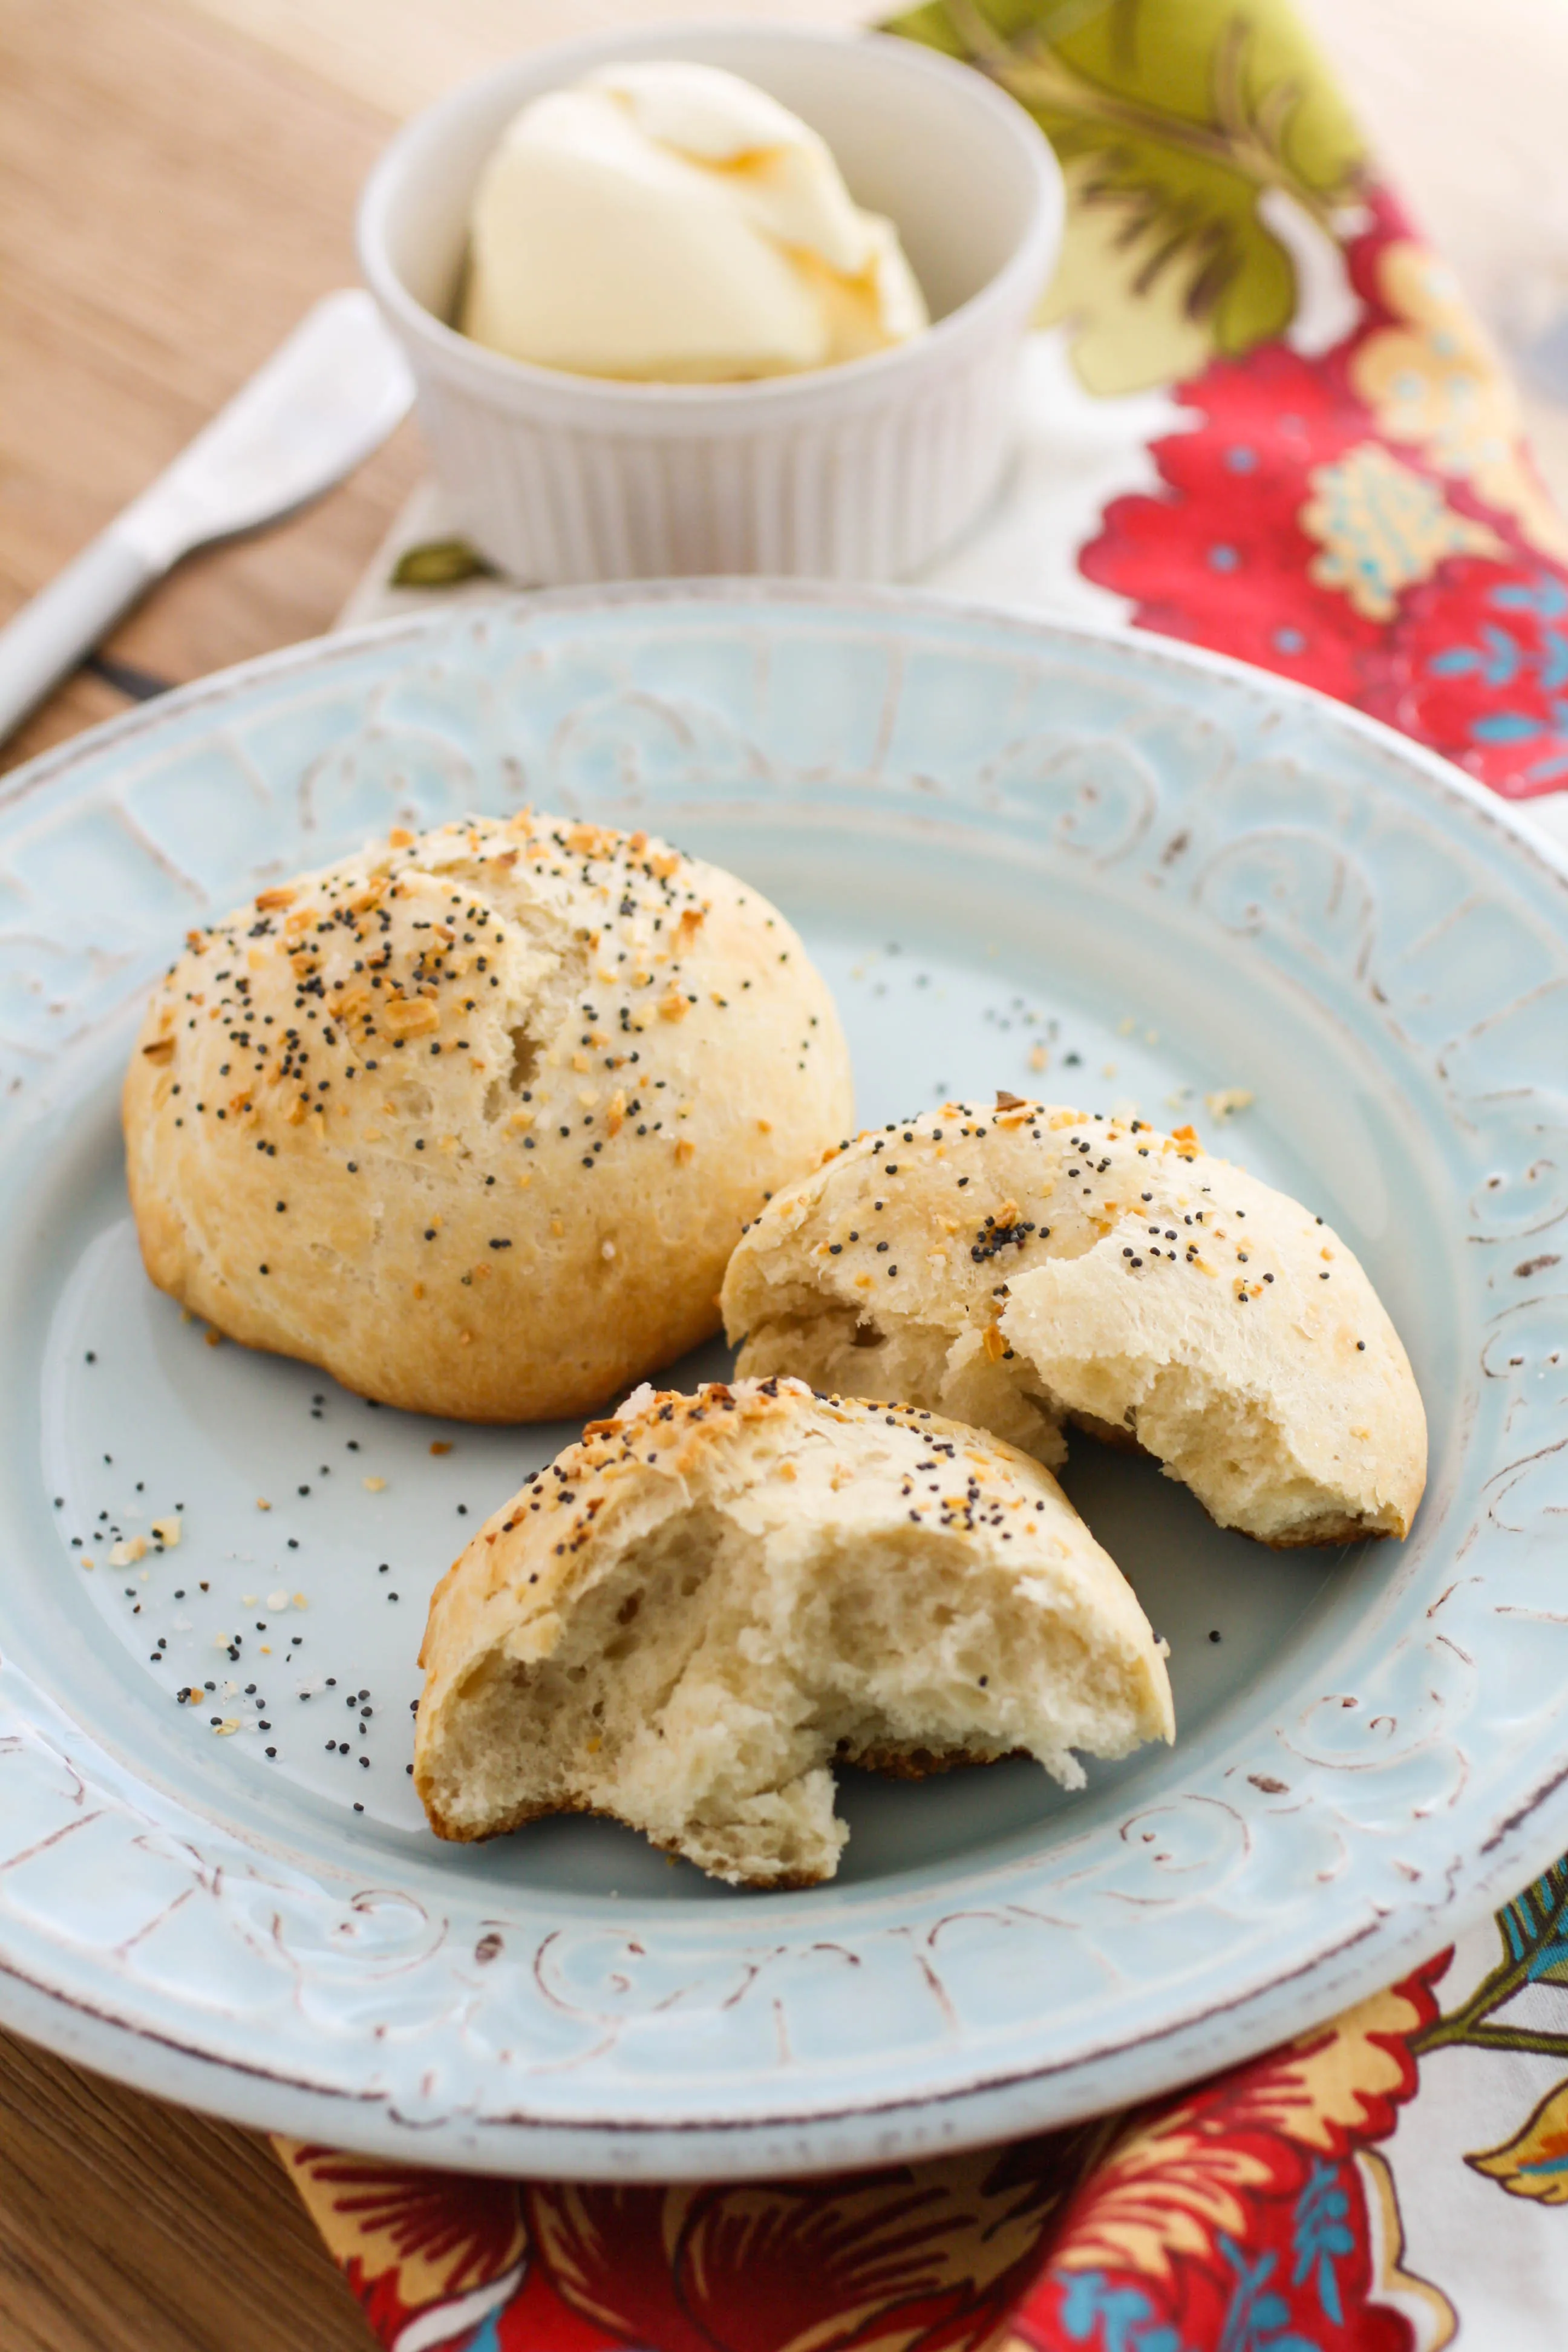 Easy Everything Bread Rolls are a wonderful homemade treat for your next meal. They're perfect for breakfast, lunch, and dinner.